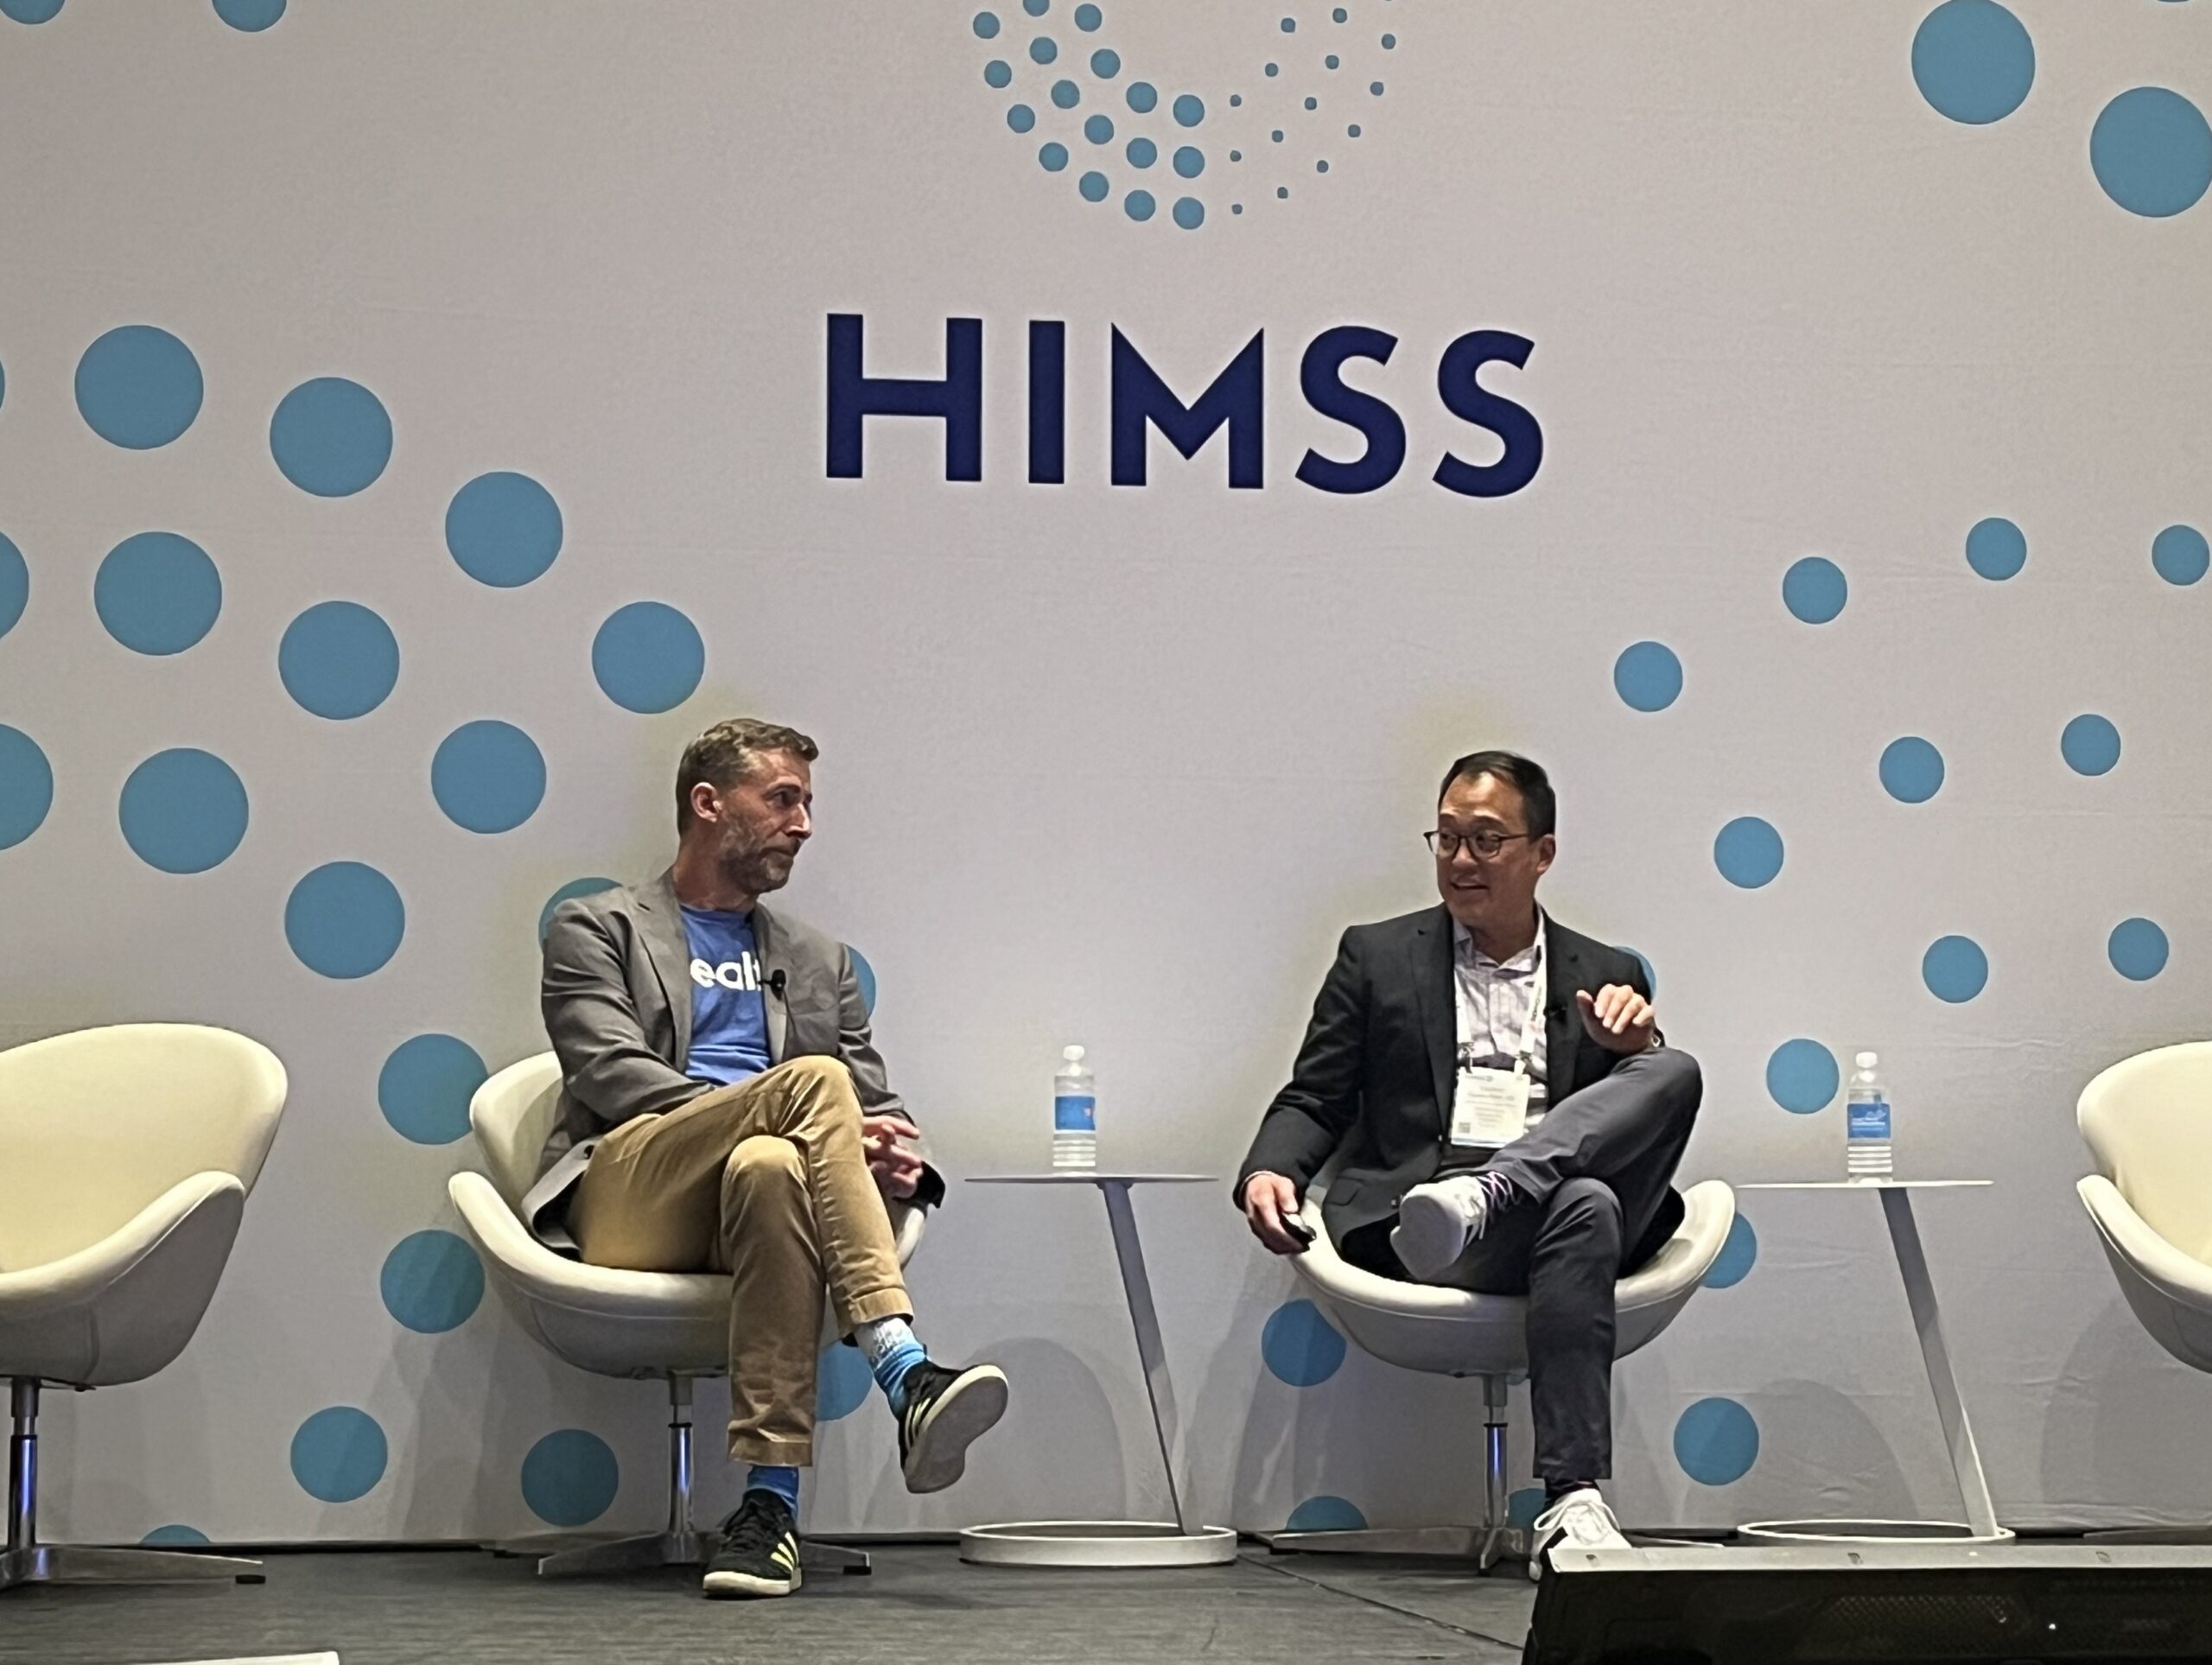 HIMSS24: Showcasing Clinical Benefits from Digital Health